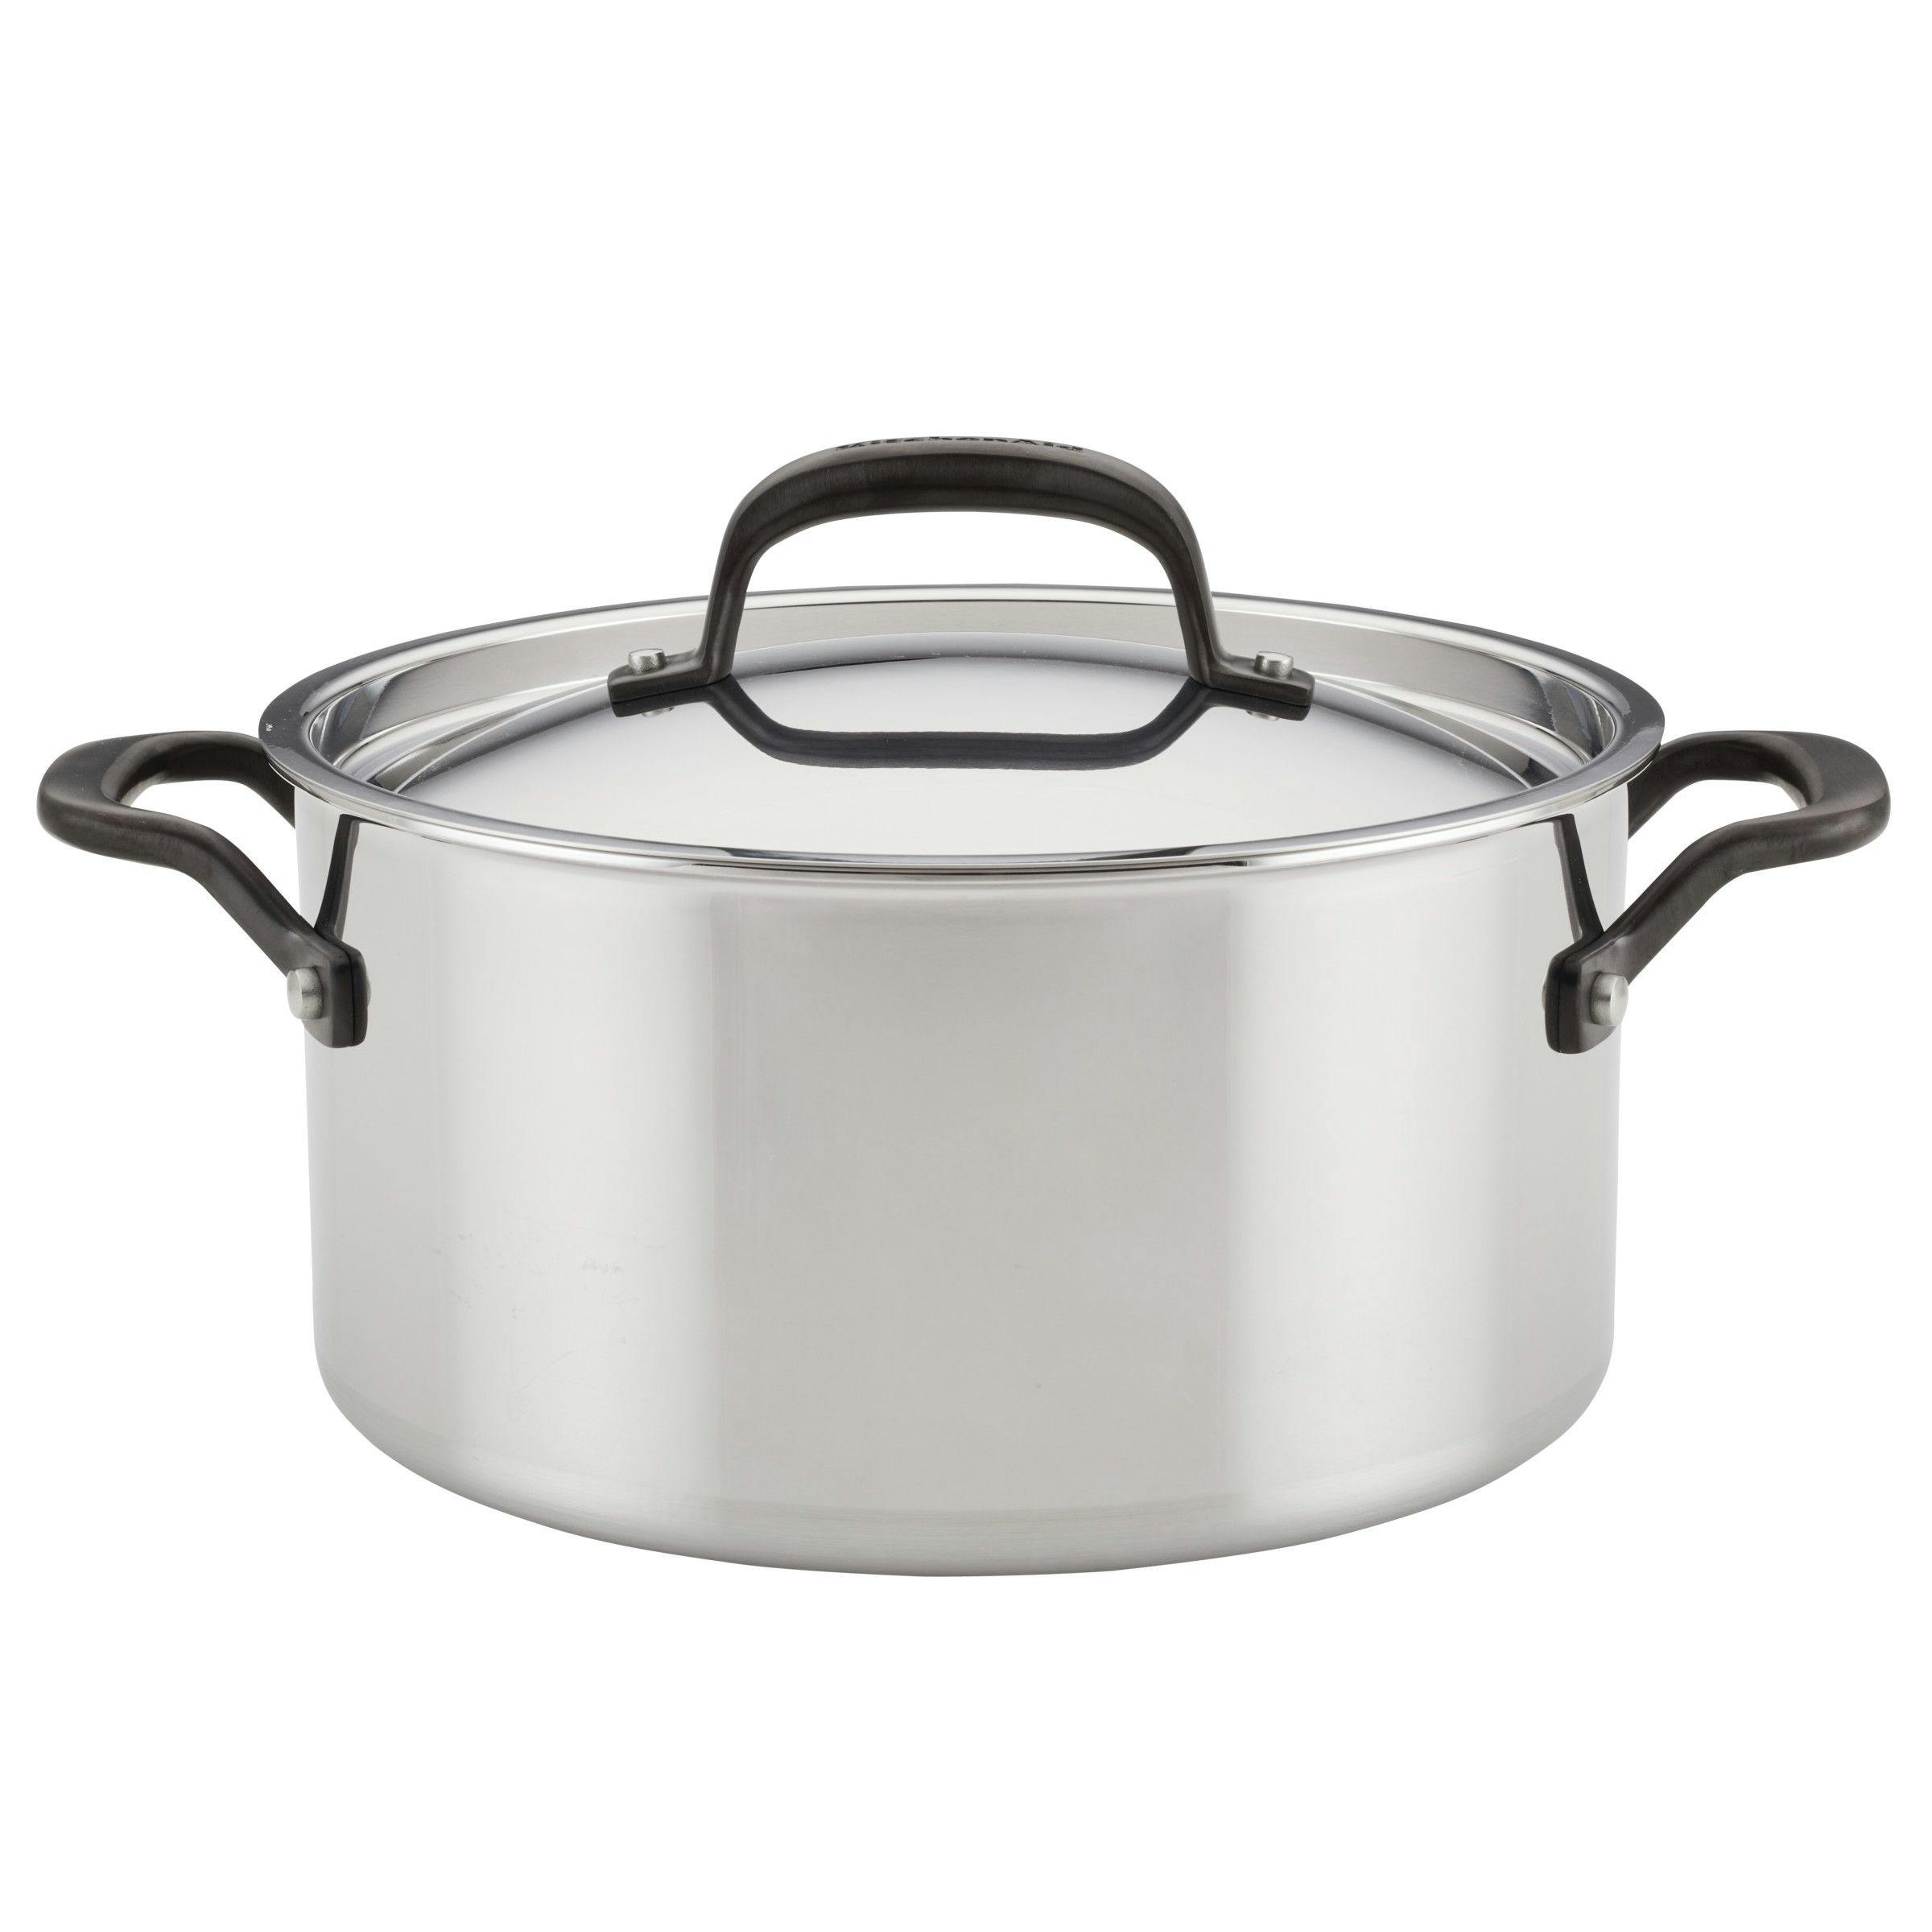 KitchenAid 5-Ply Clad Stainless Steel Induction Stockpot with Lid, 6-Quart, Polished Stainless Steel